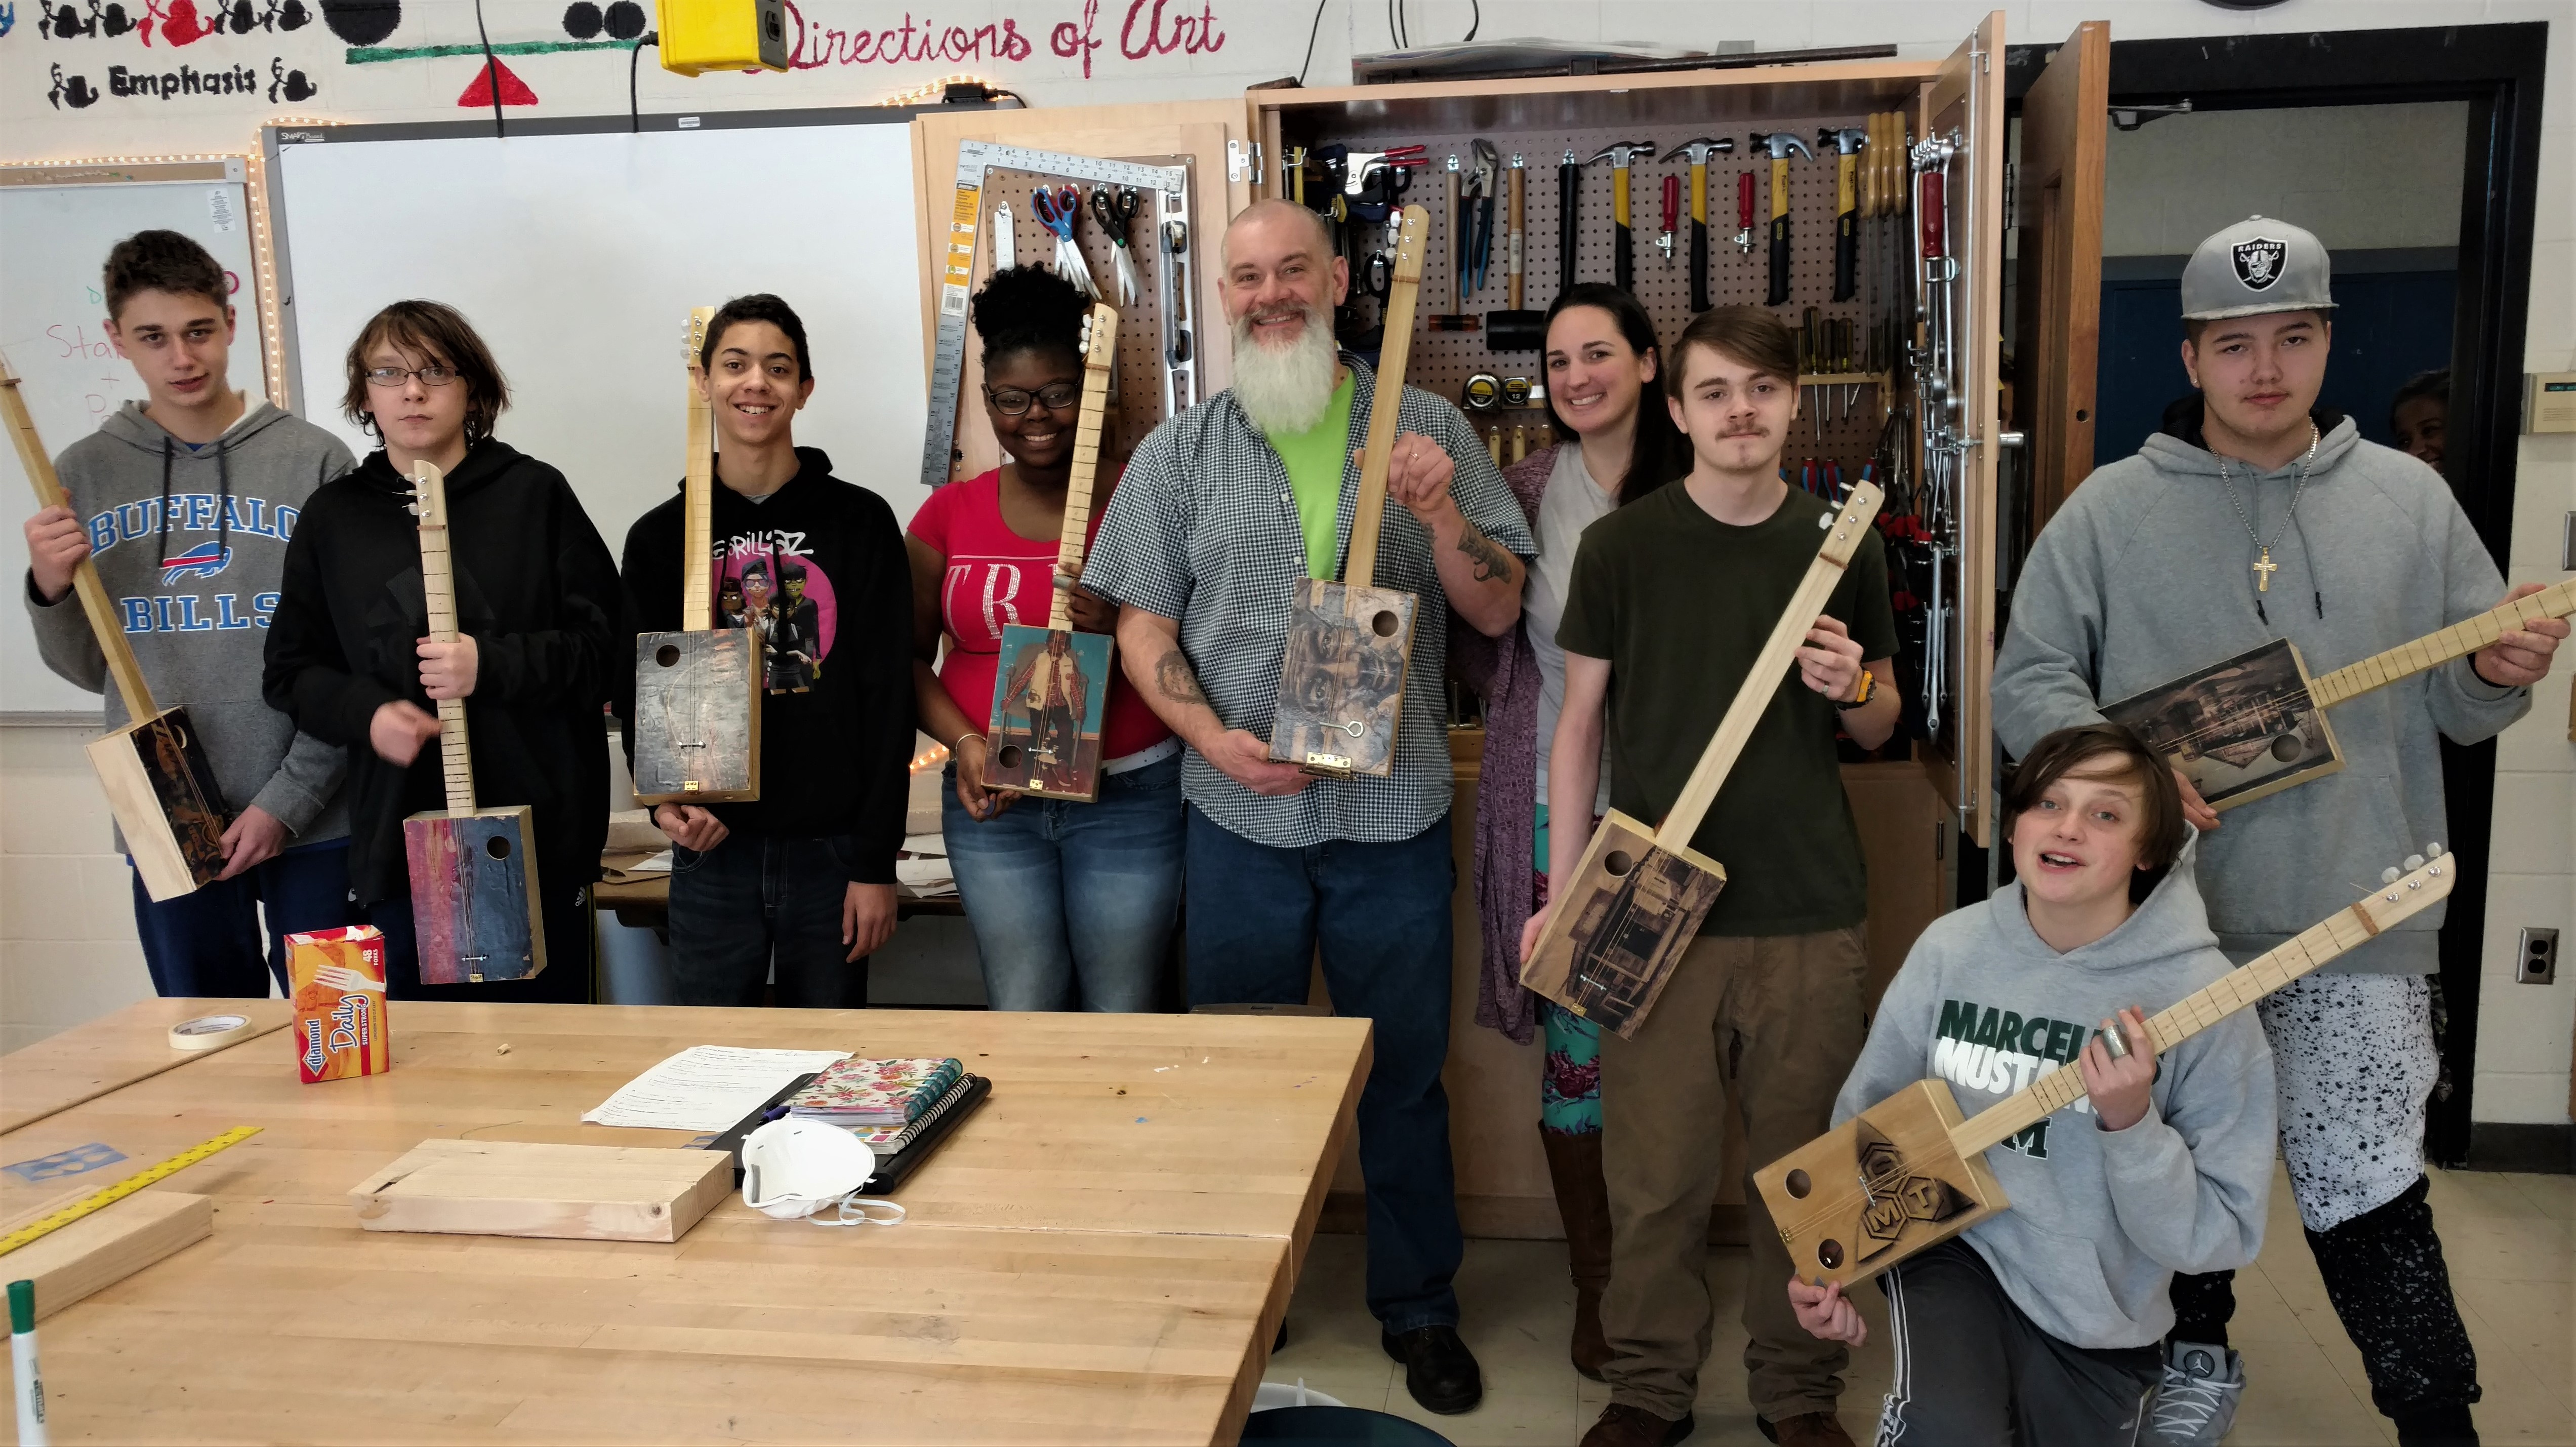 Educator Mr. Tracy H. with students and cigar box guitars